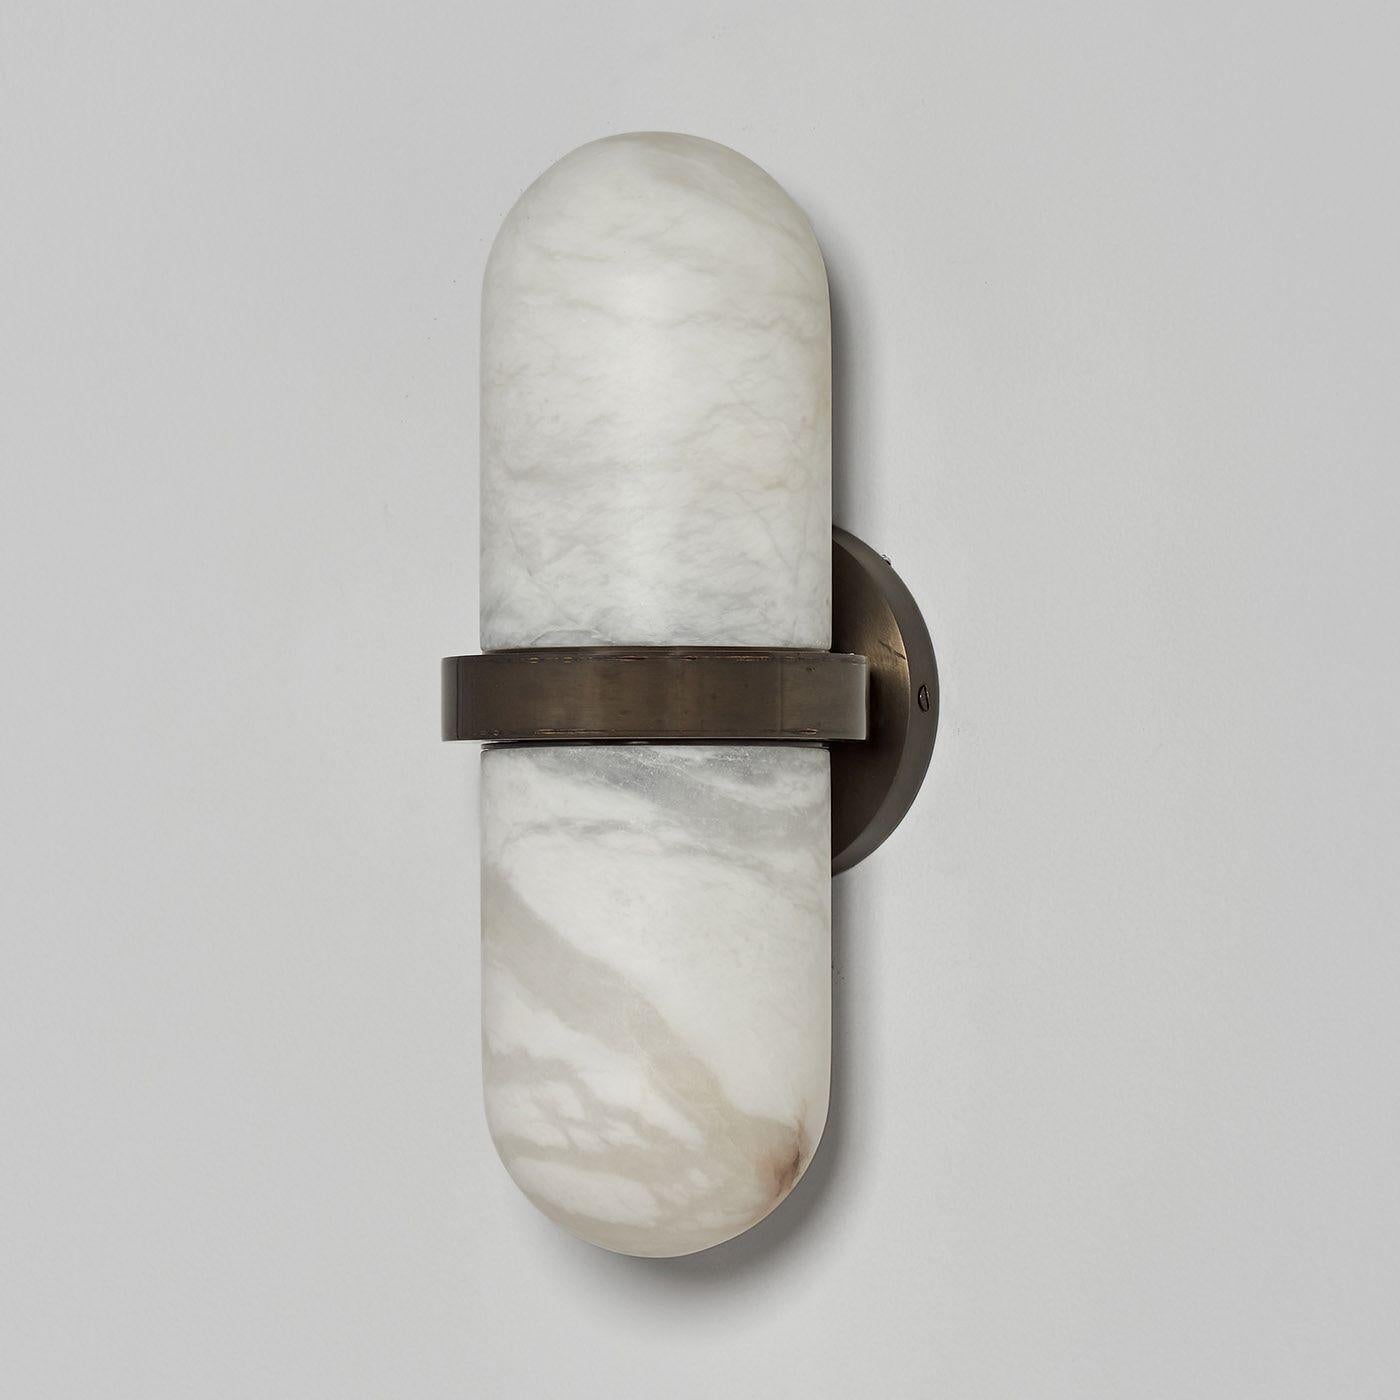 The Pill wall sconce has been conceived and developed in collaboration with the architecture firm Droulers Architecture. It recalls a pill made of two alabaster parts which join thanks to the middle brass structure containing two E14 lightbulbs. Its